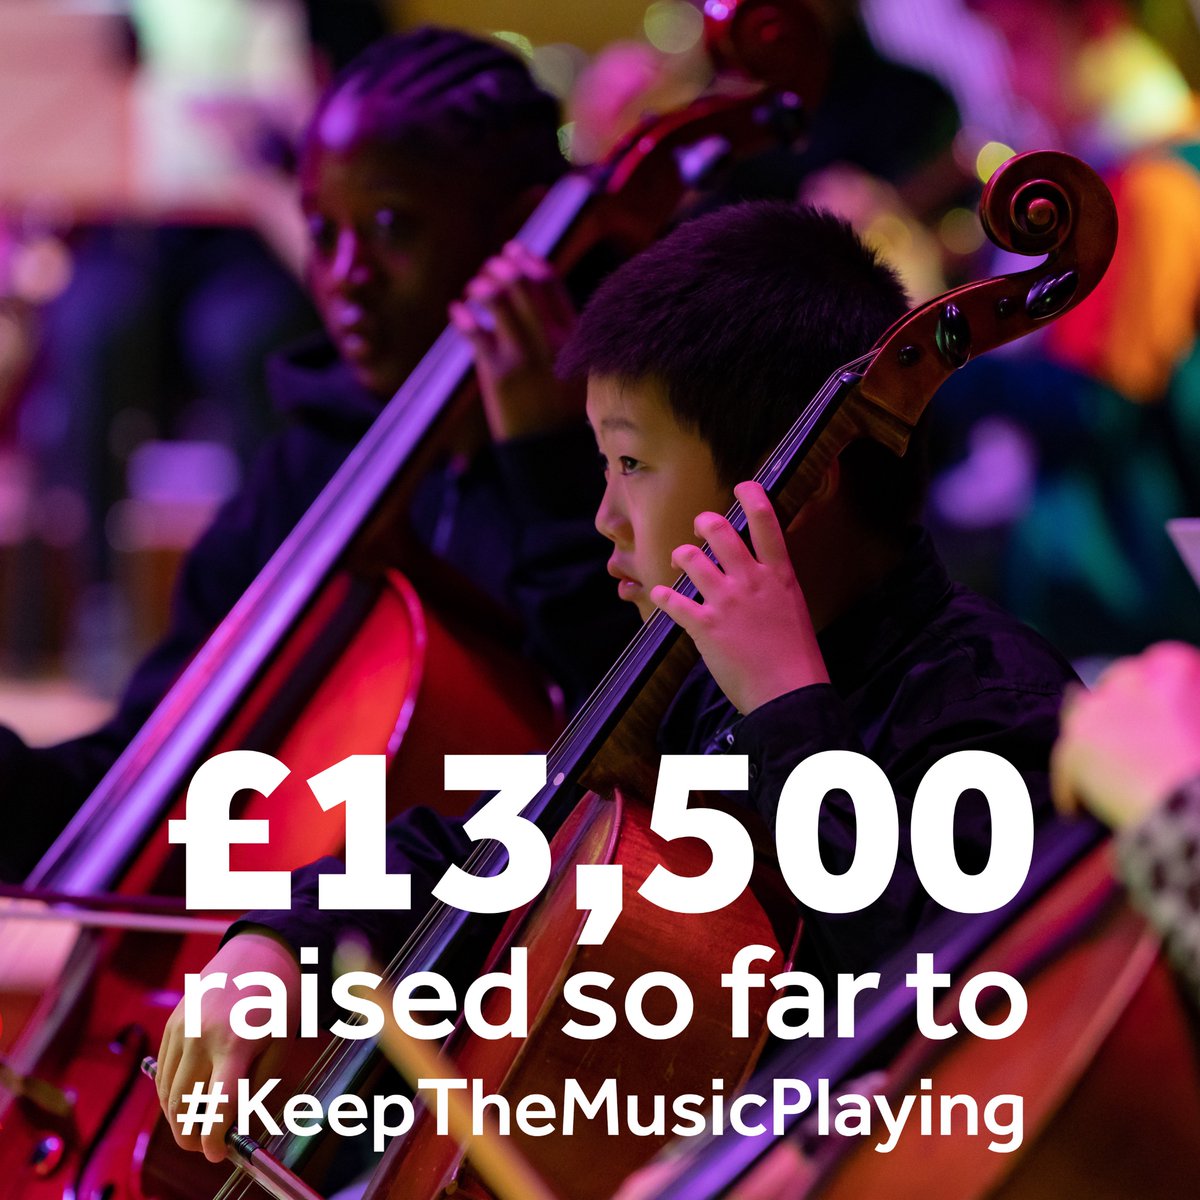 10 weeks into our campaign and we’ve raised £13,500! Your generous donations support programmes like our Inspire primary workshops that introduce the whole school to orchestral music. Help us to #KeepTheMusicPlaying with young people by donating today londonmozartplayers.com/donate